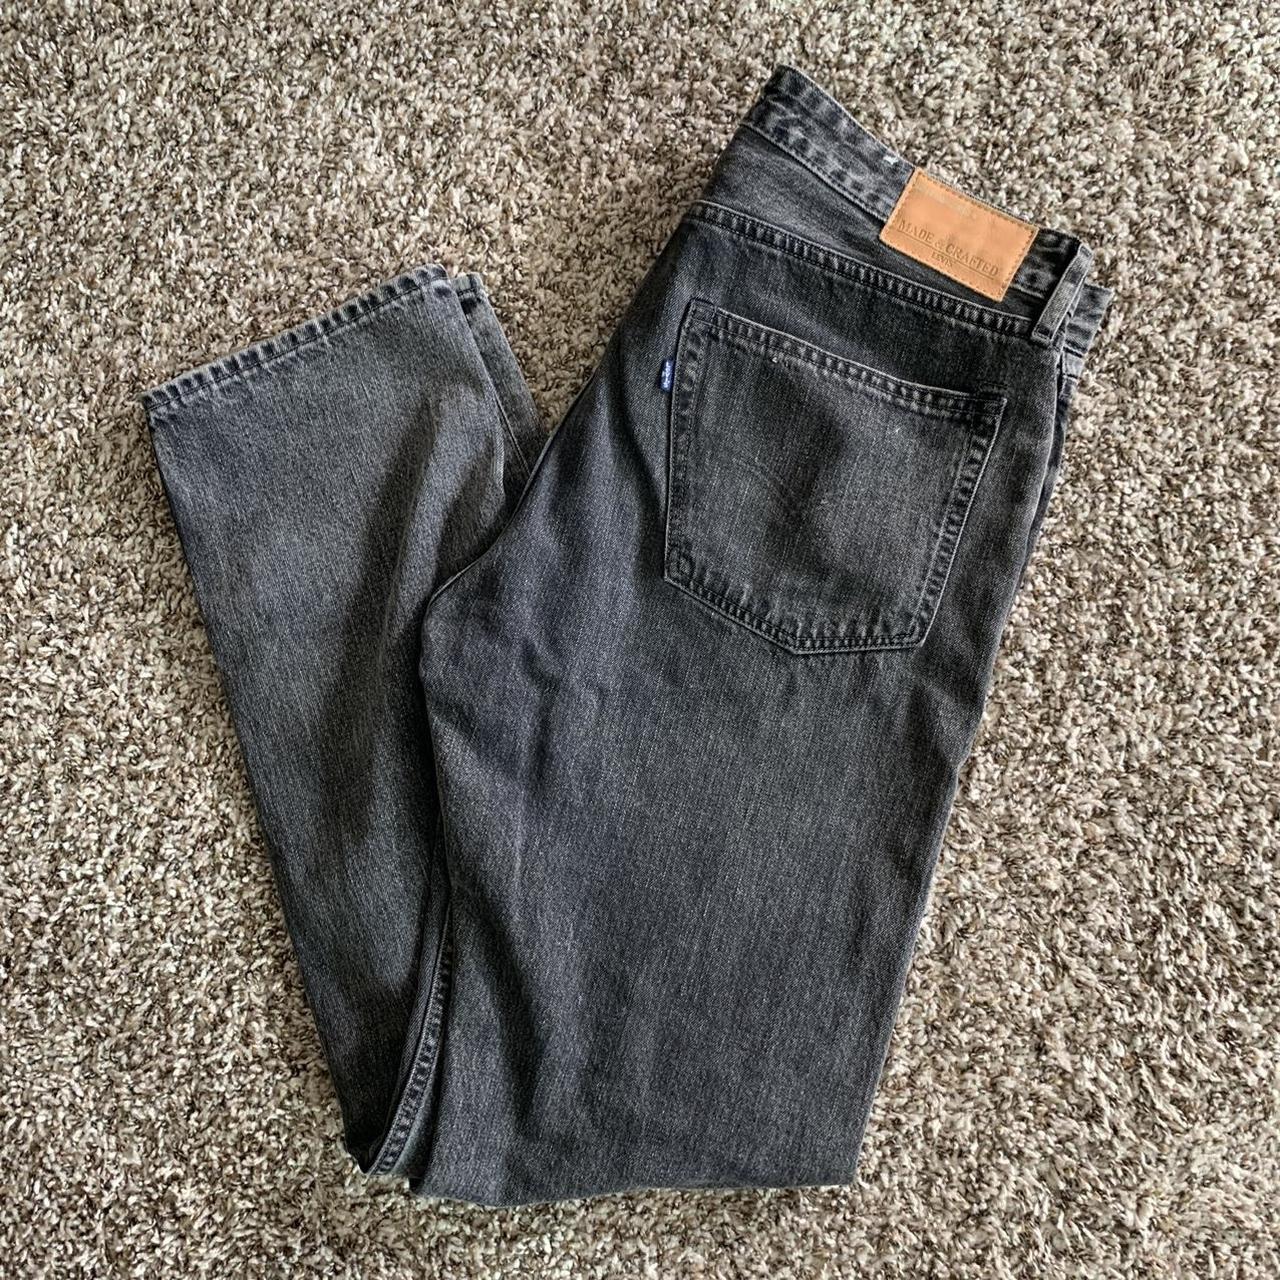 Levi’s Made & Crafted Designer Jeans These are... - Depop